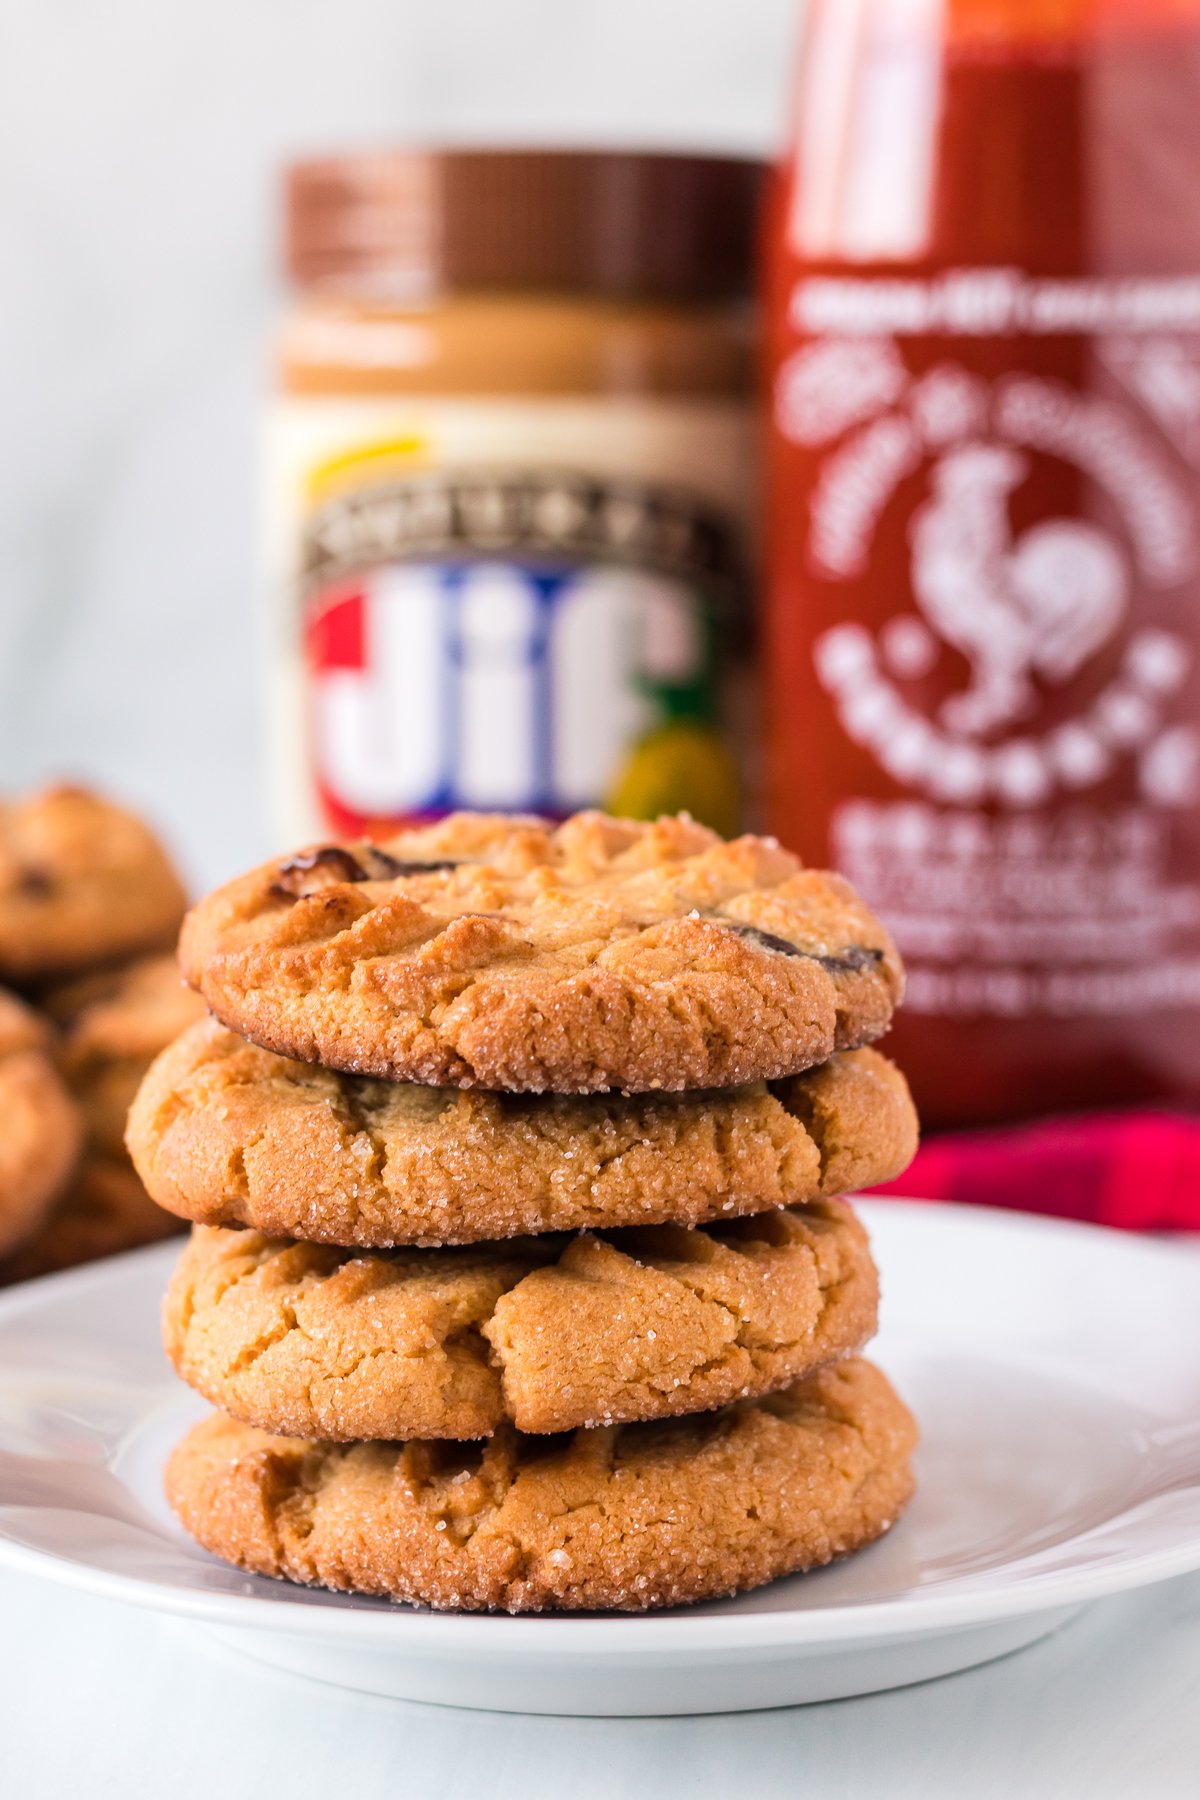 Spicy Peanut Butter Chocolate Chip Cookies